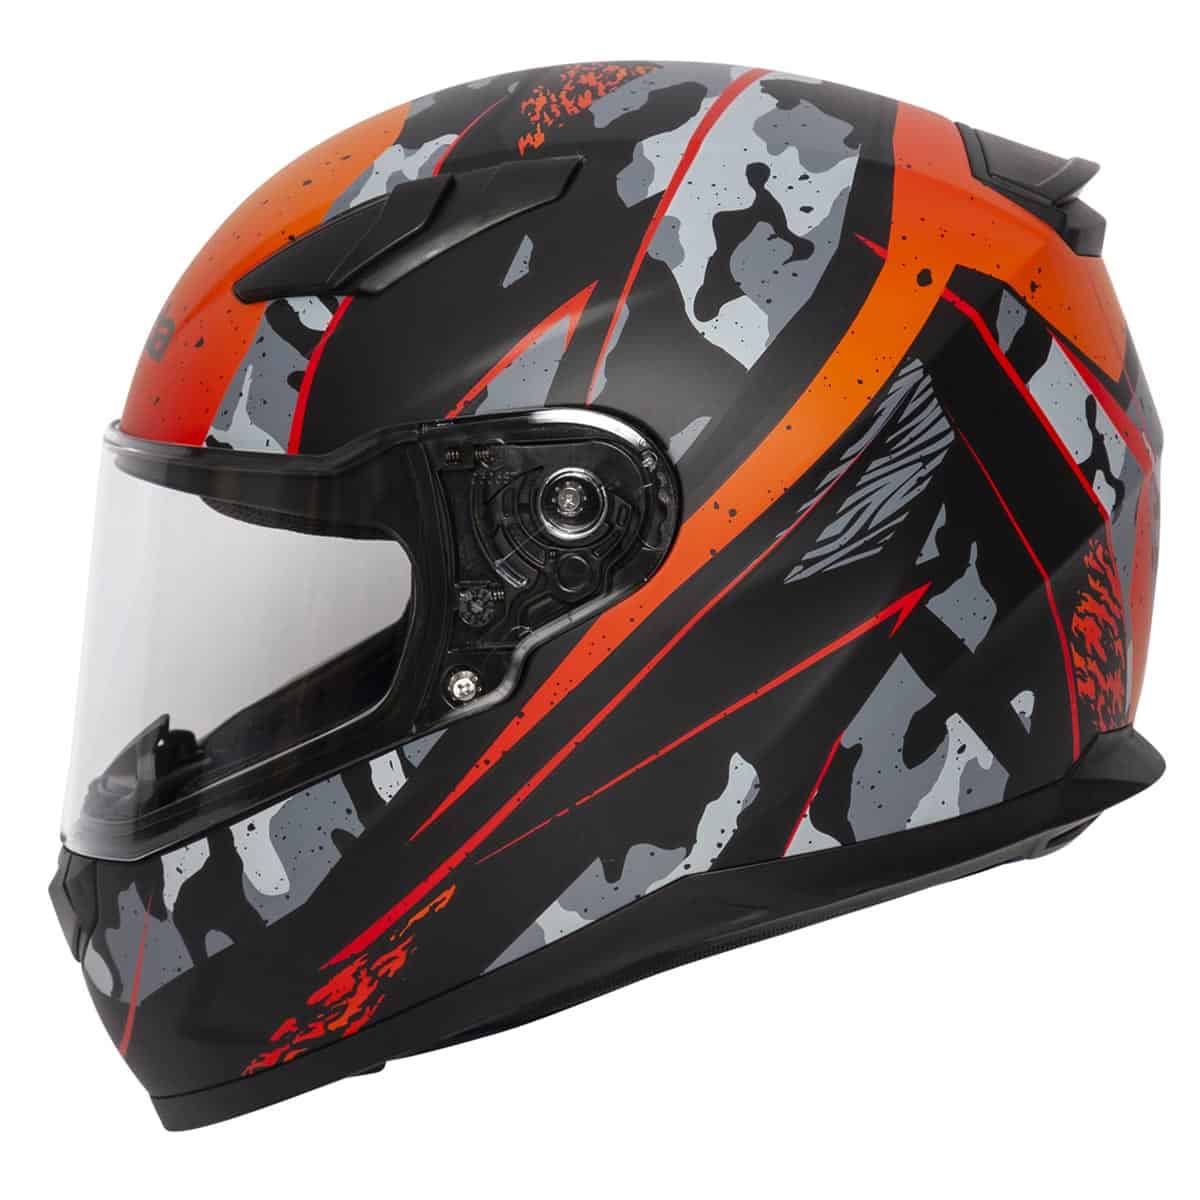 Spada Raiden Helmet in Camo Orange: Entry level full face motorcycle helmet. The Spada Raiden motorcycle helmet is perfect for bikers who have just started out riding or who need a full face helmet which doesn't break the bank.  Side view.